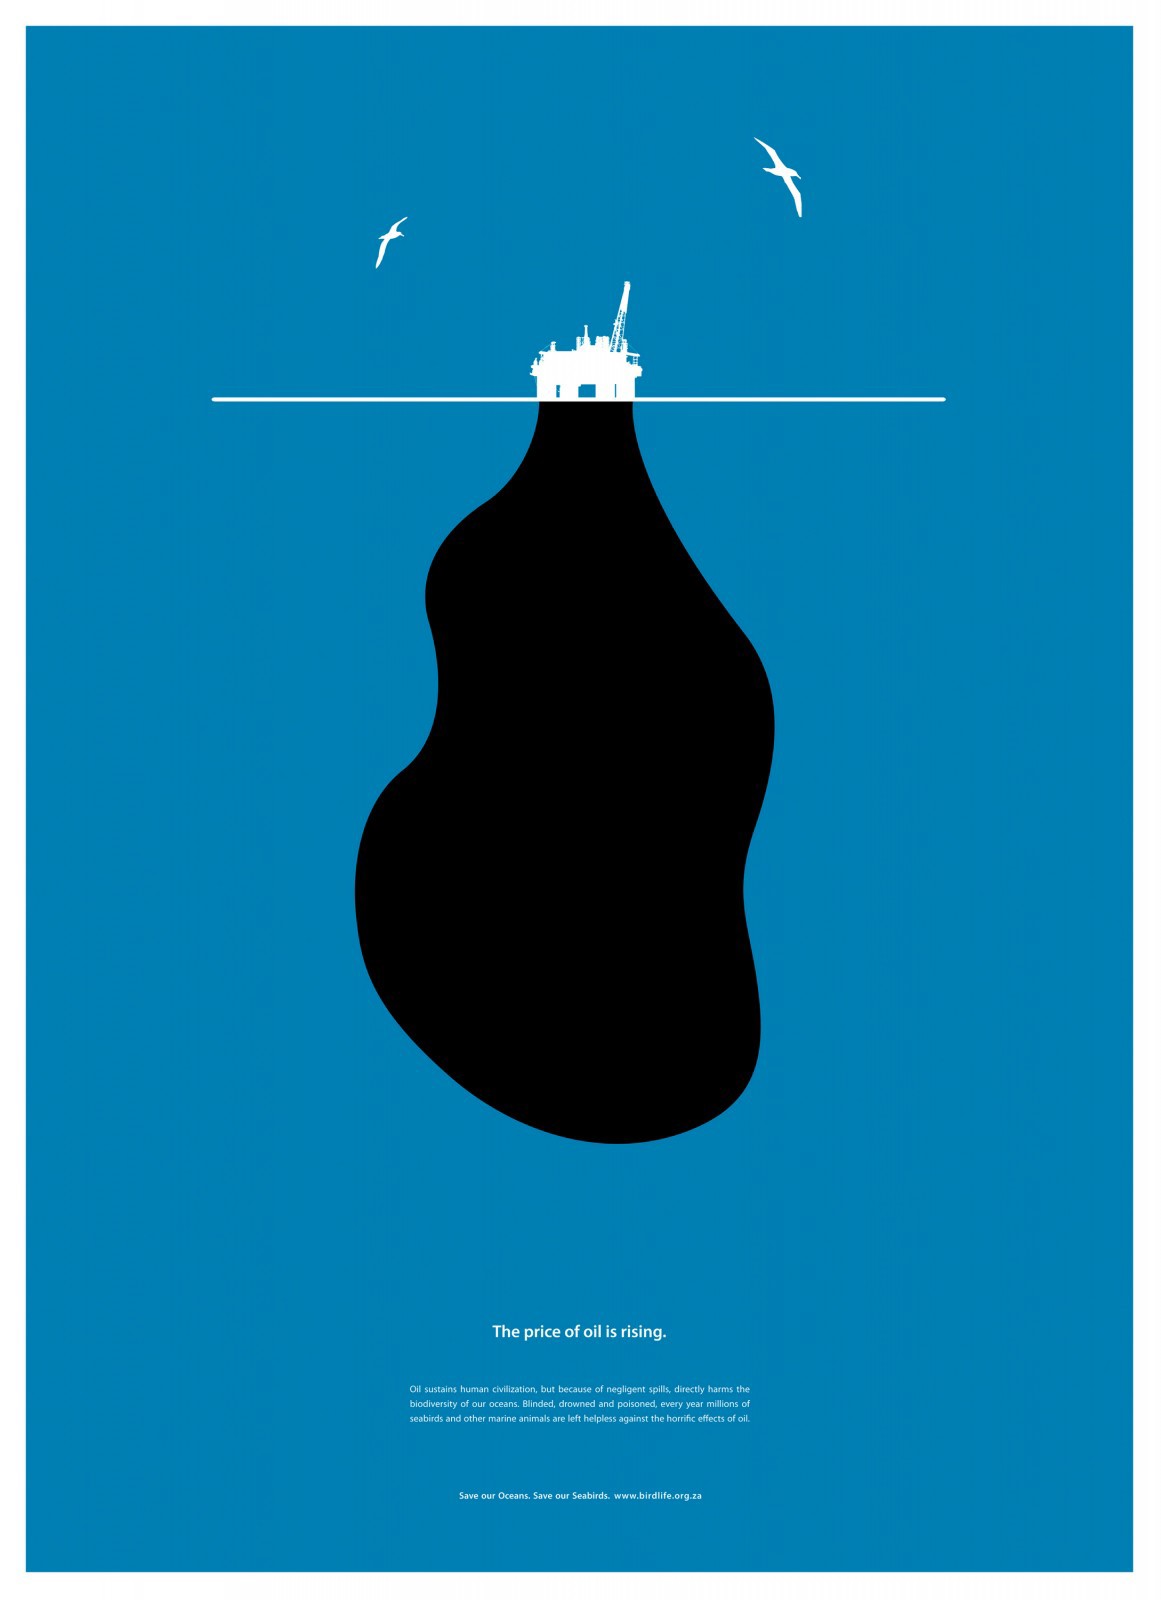 Save Our Ocean, Save Our Seabirds - Poster Campaign on Behance